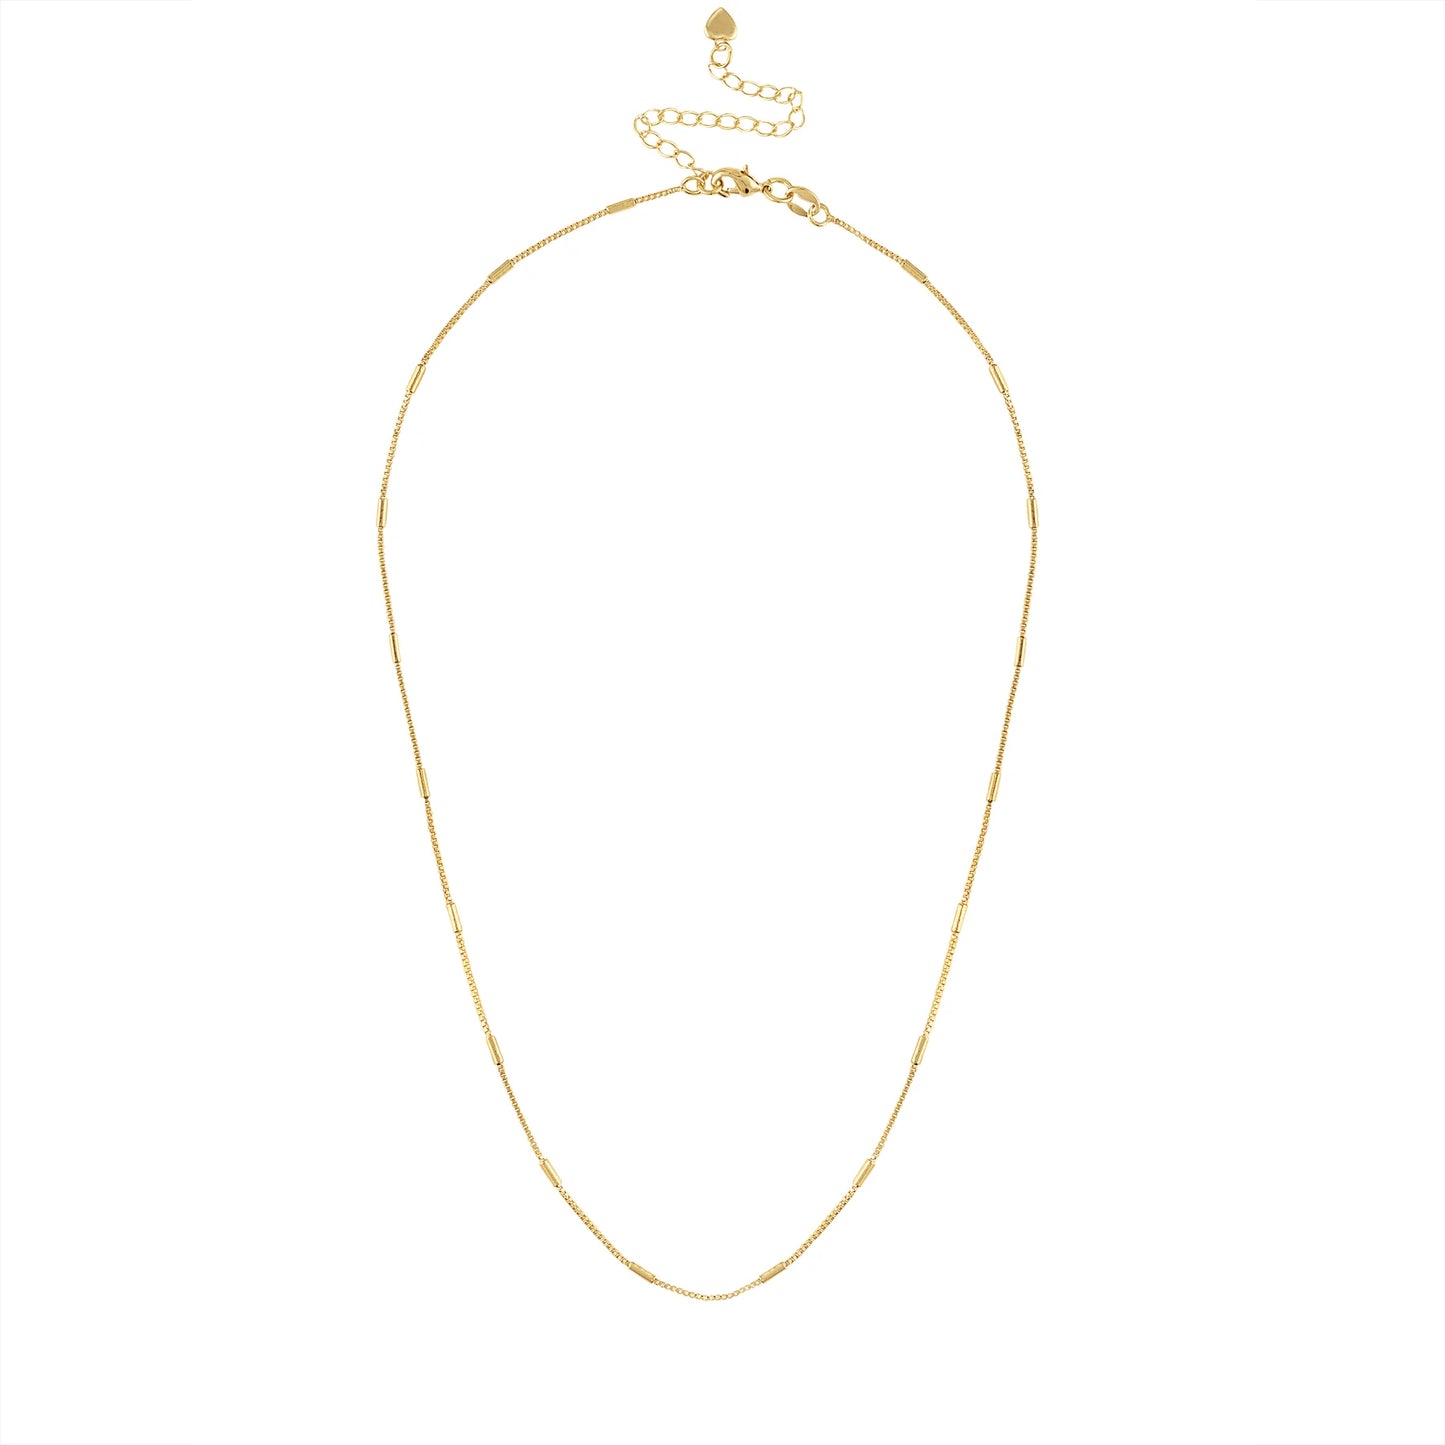 Olivia Le | Emmy chain necklace